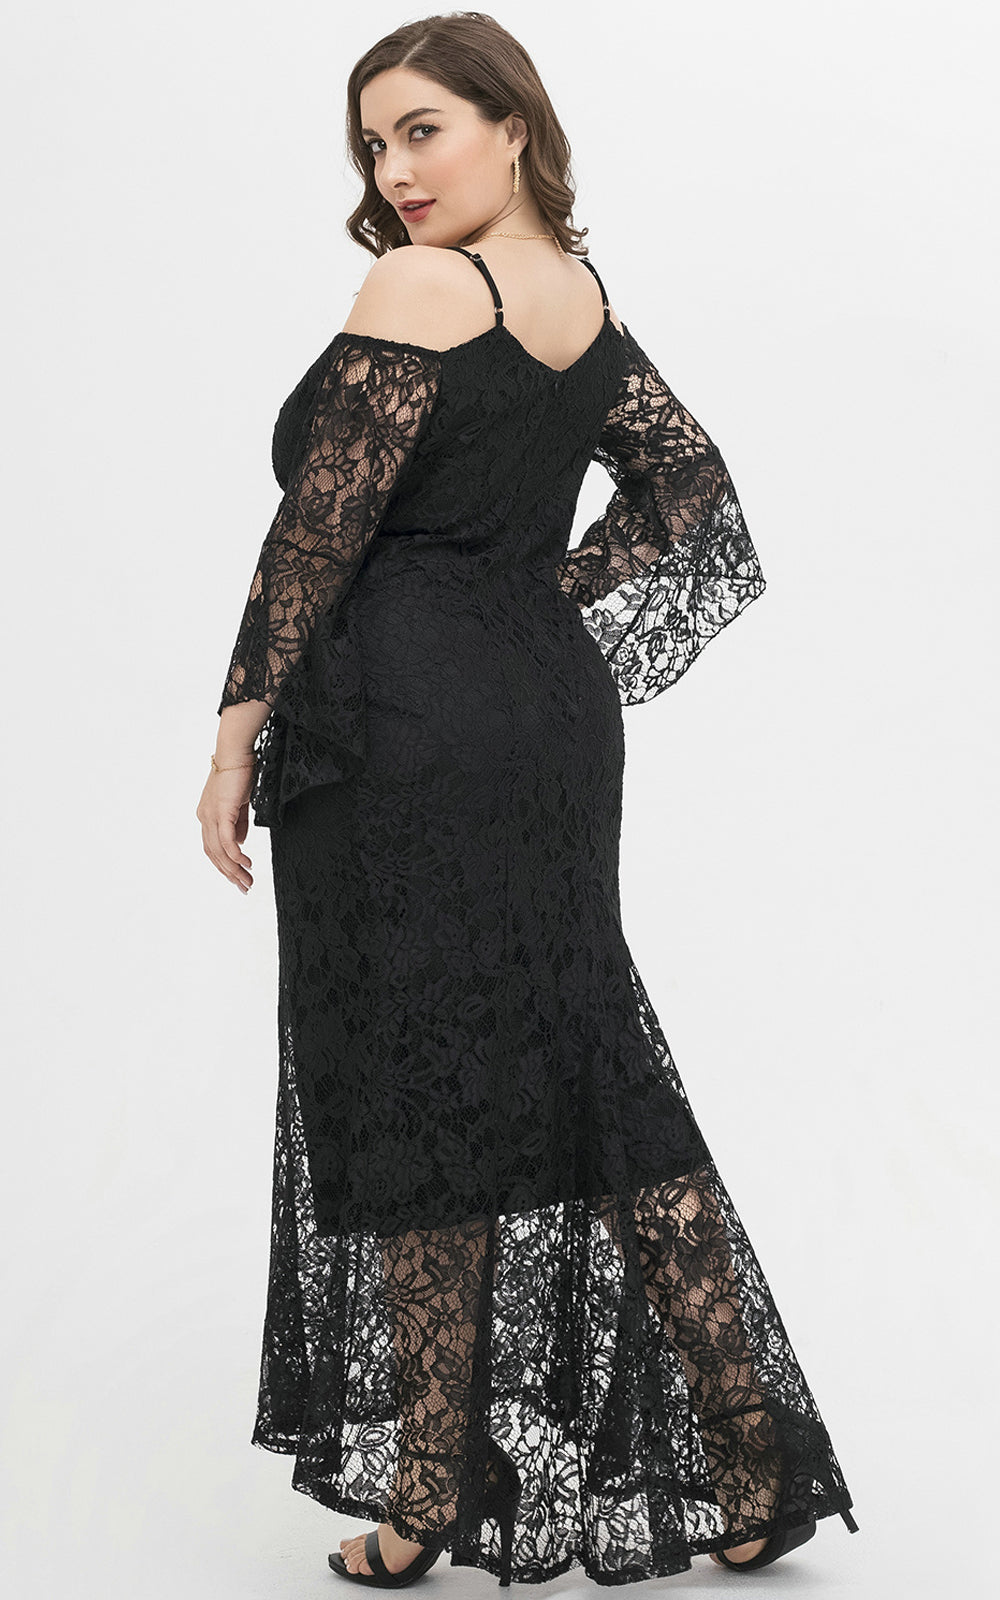 Plus Size Women Maxi Evening Dresses Cold Shoulder Bell Sleeve Lace Overlay Dress